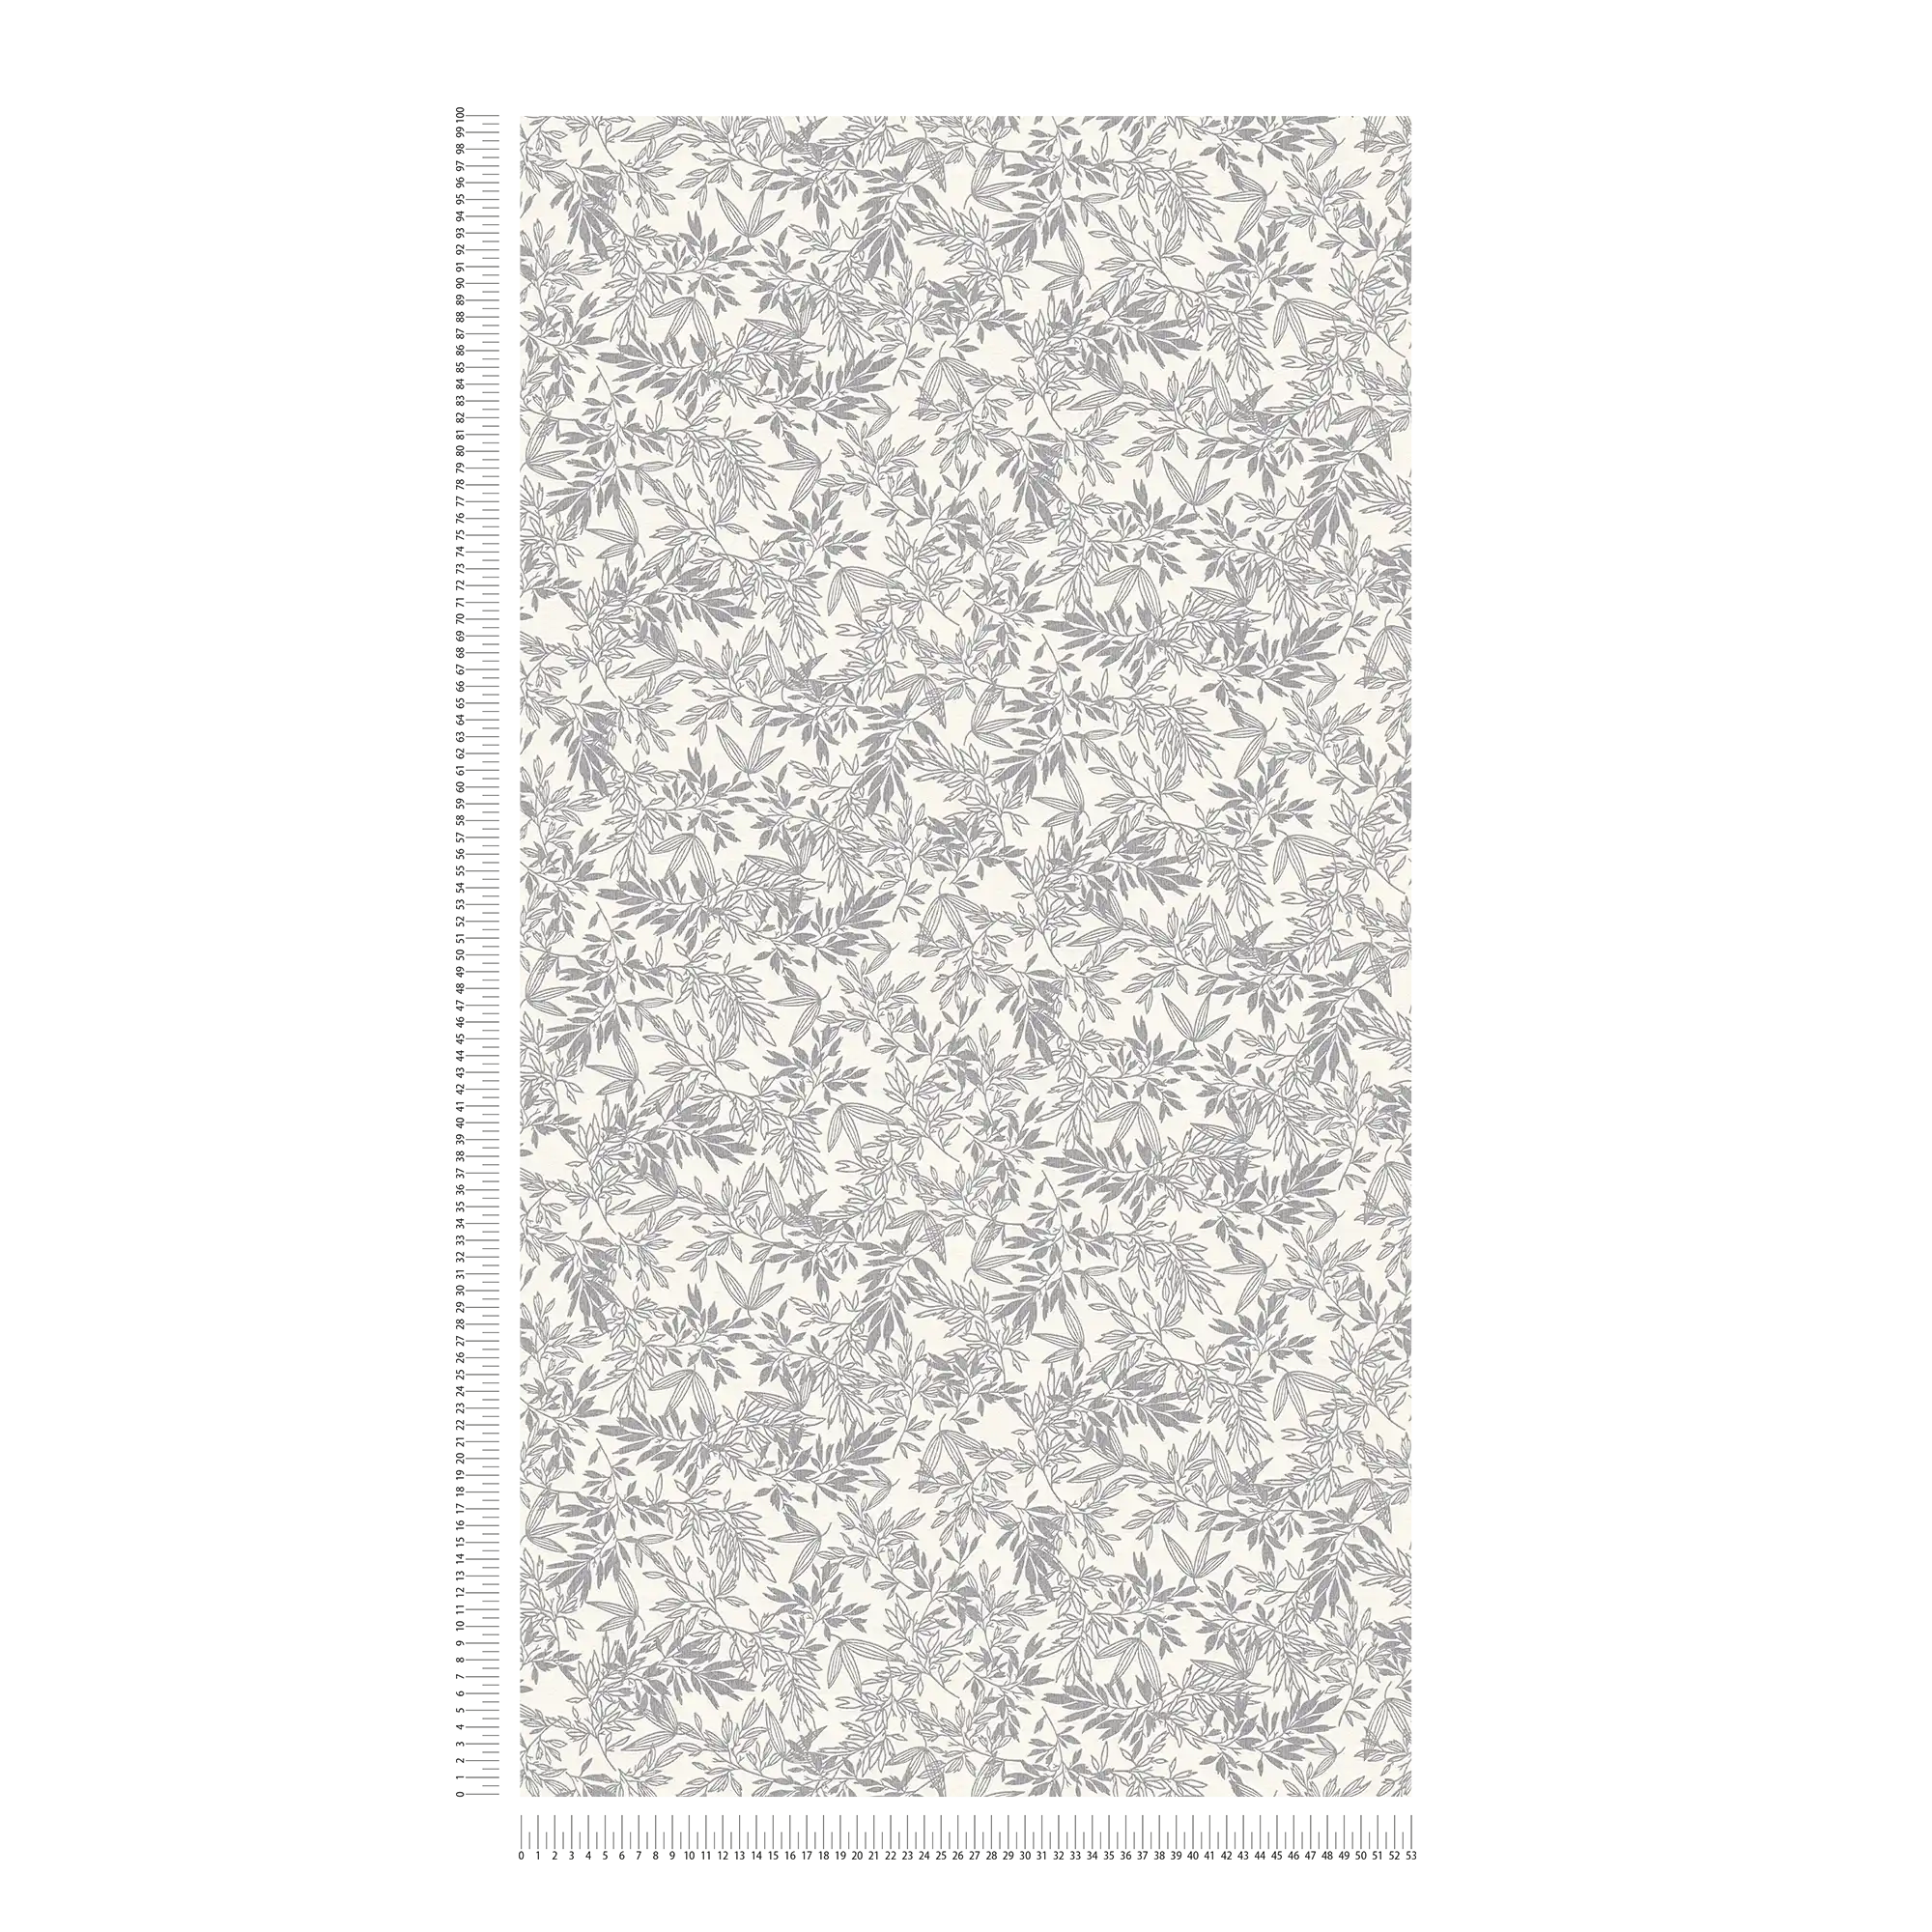             Floral wallpaper with leaves pattern in matt - grey, white
        